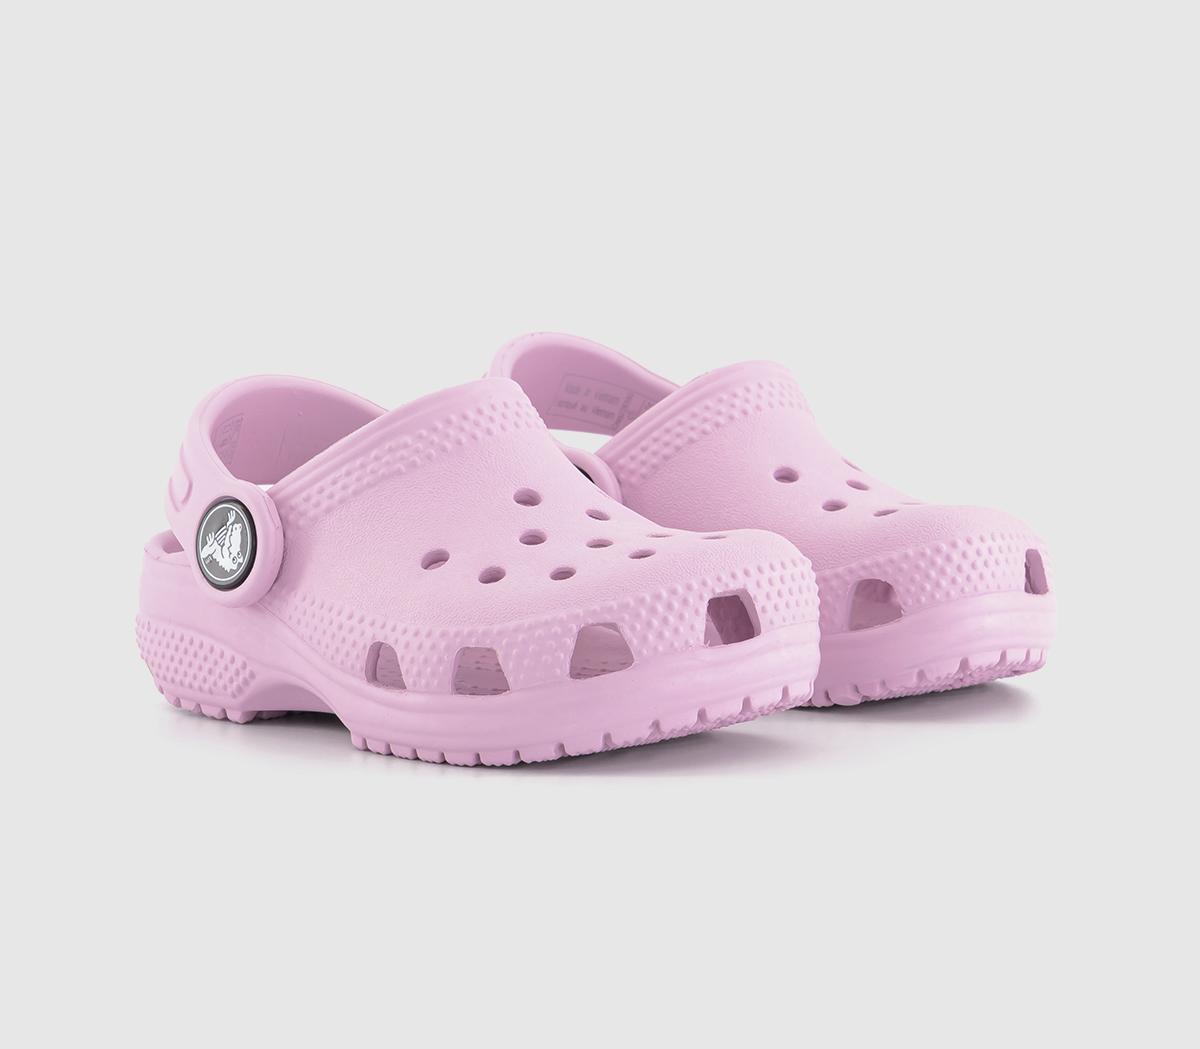 Crocs Classic Kids Clogs Ballerina Pink Synthetic, 8 Infant